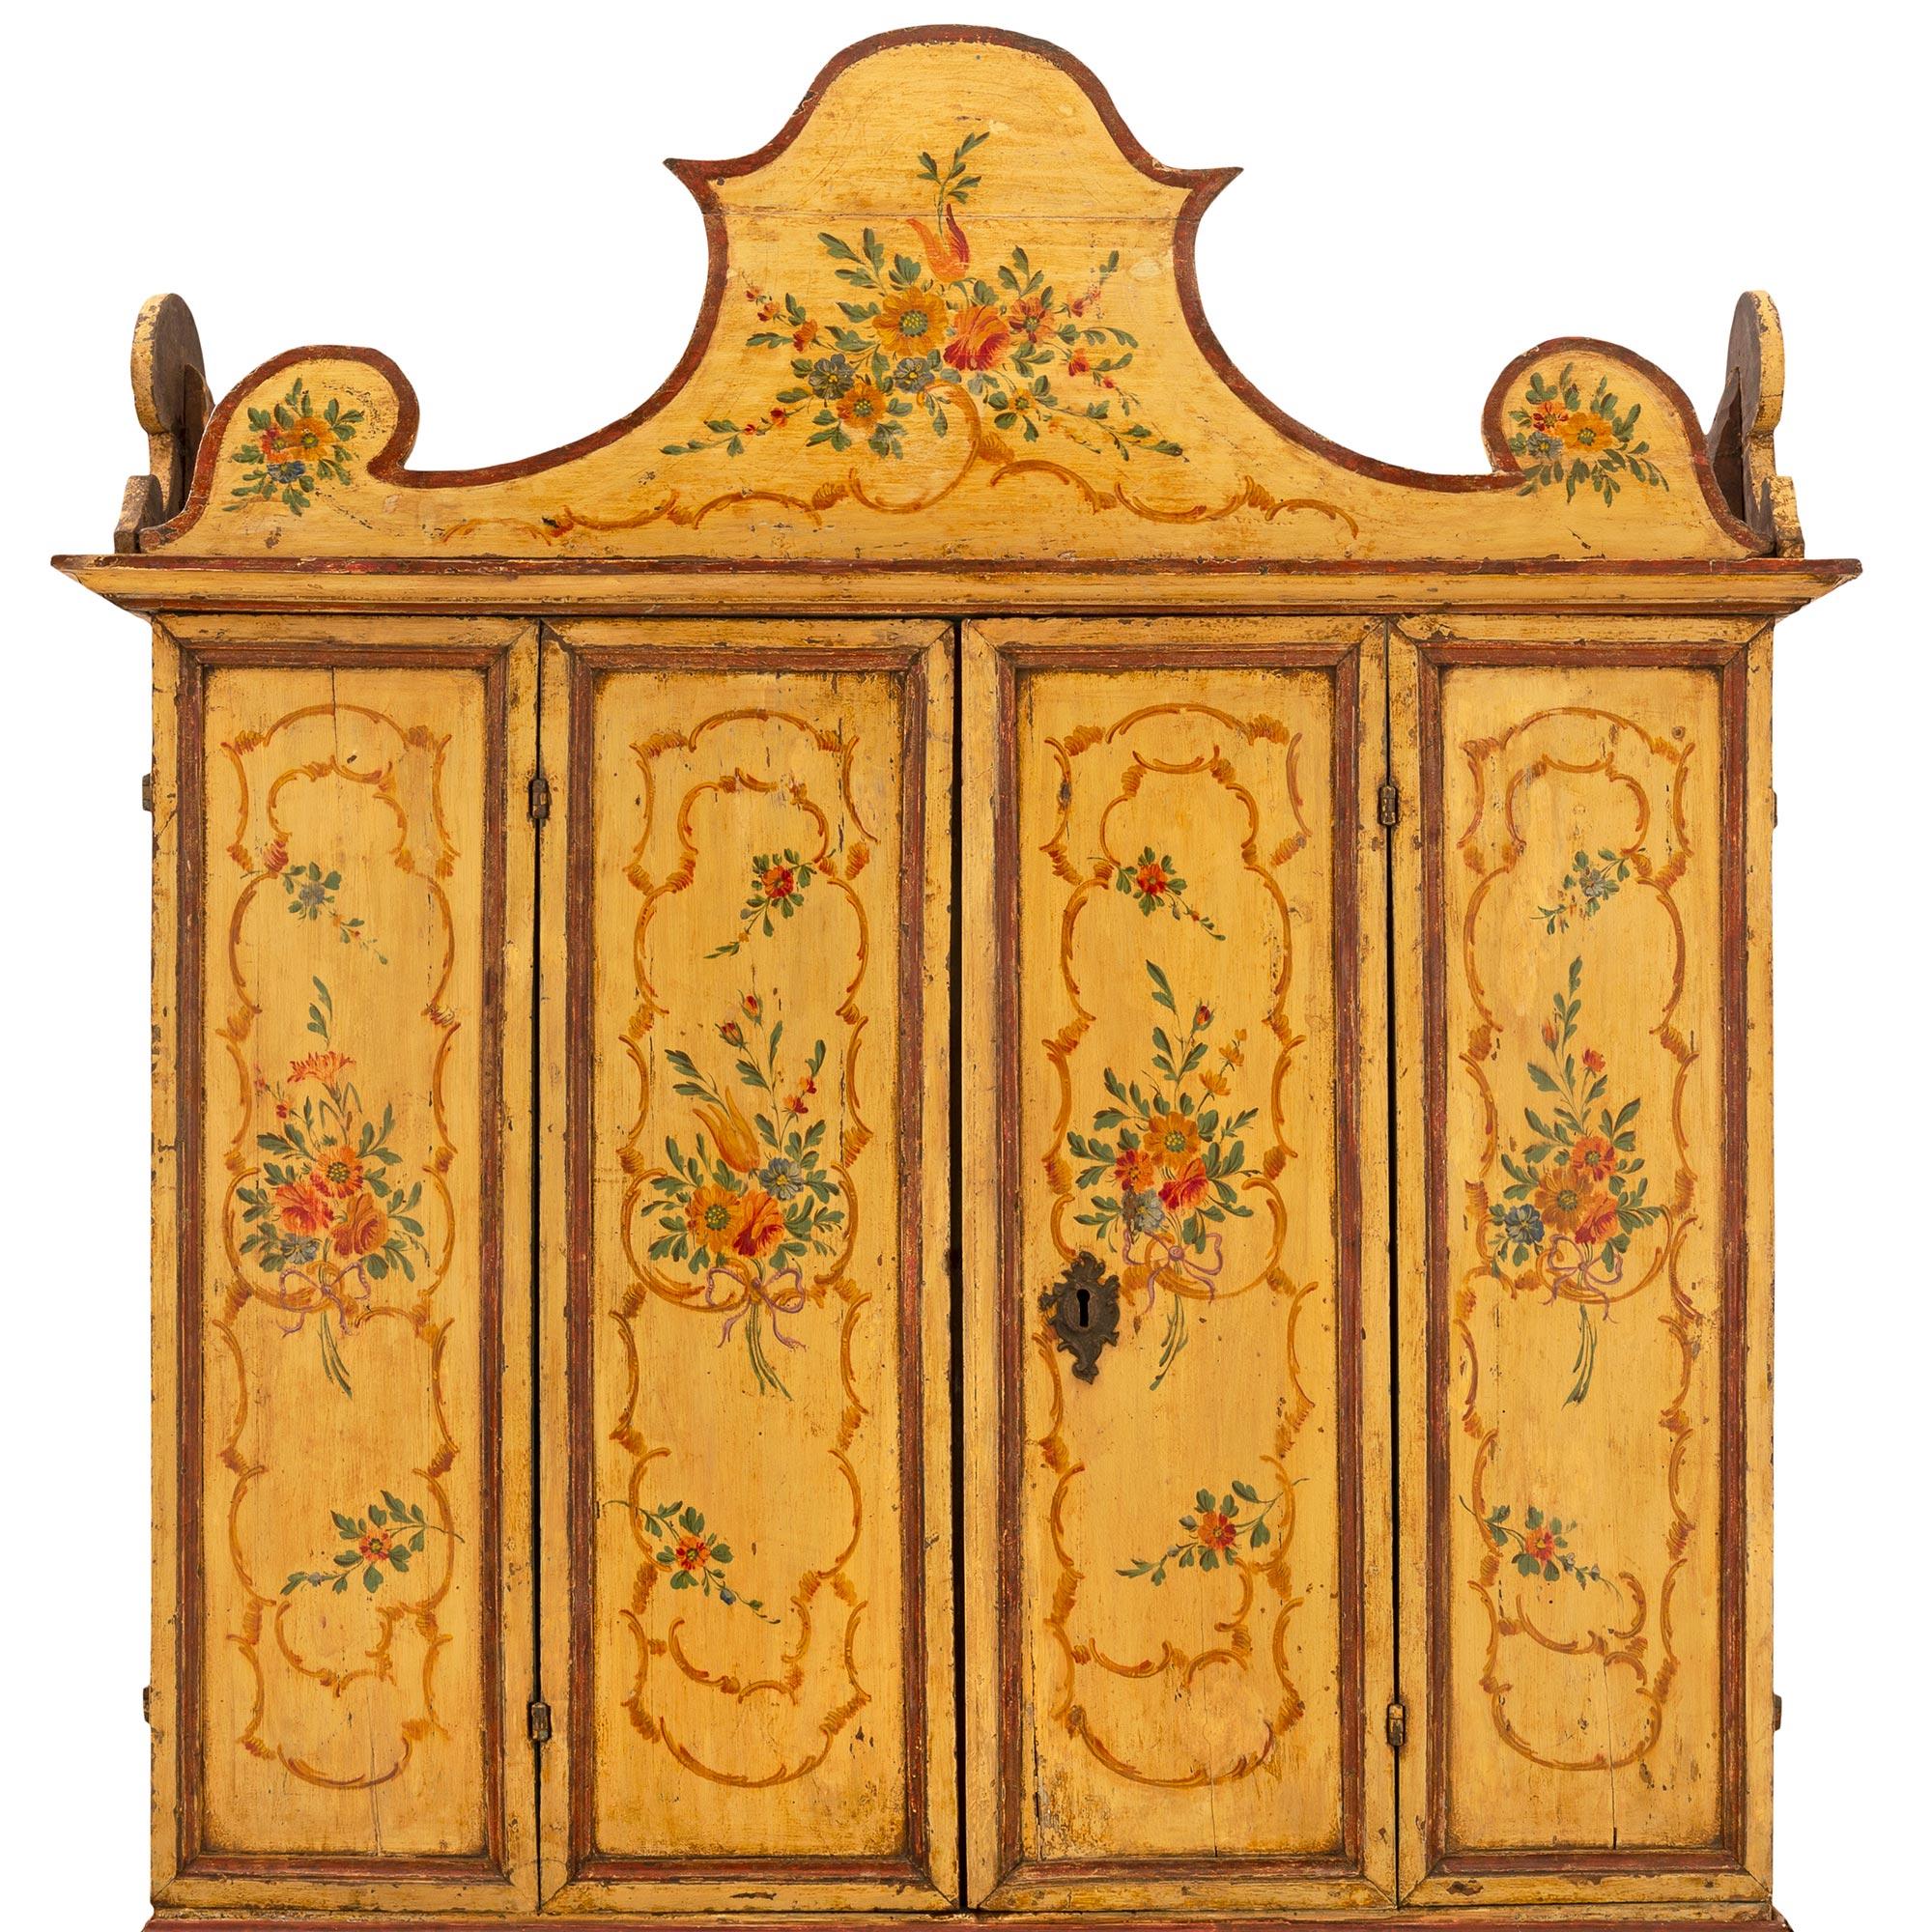 Wood Italian Mid-18th Century Genovese St. Hand Painted Cabinet / Desk For Sale